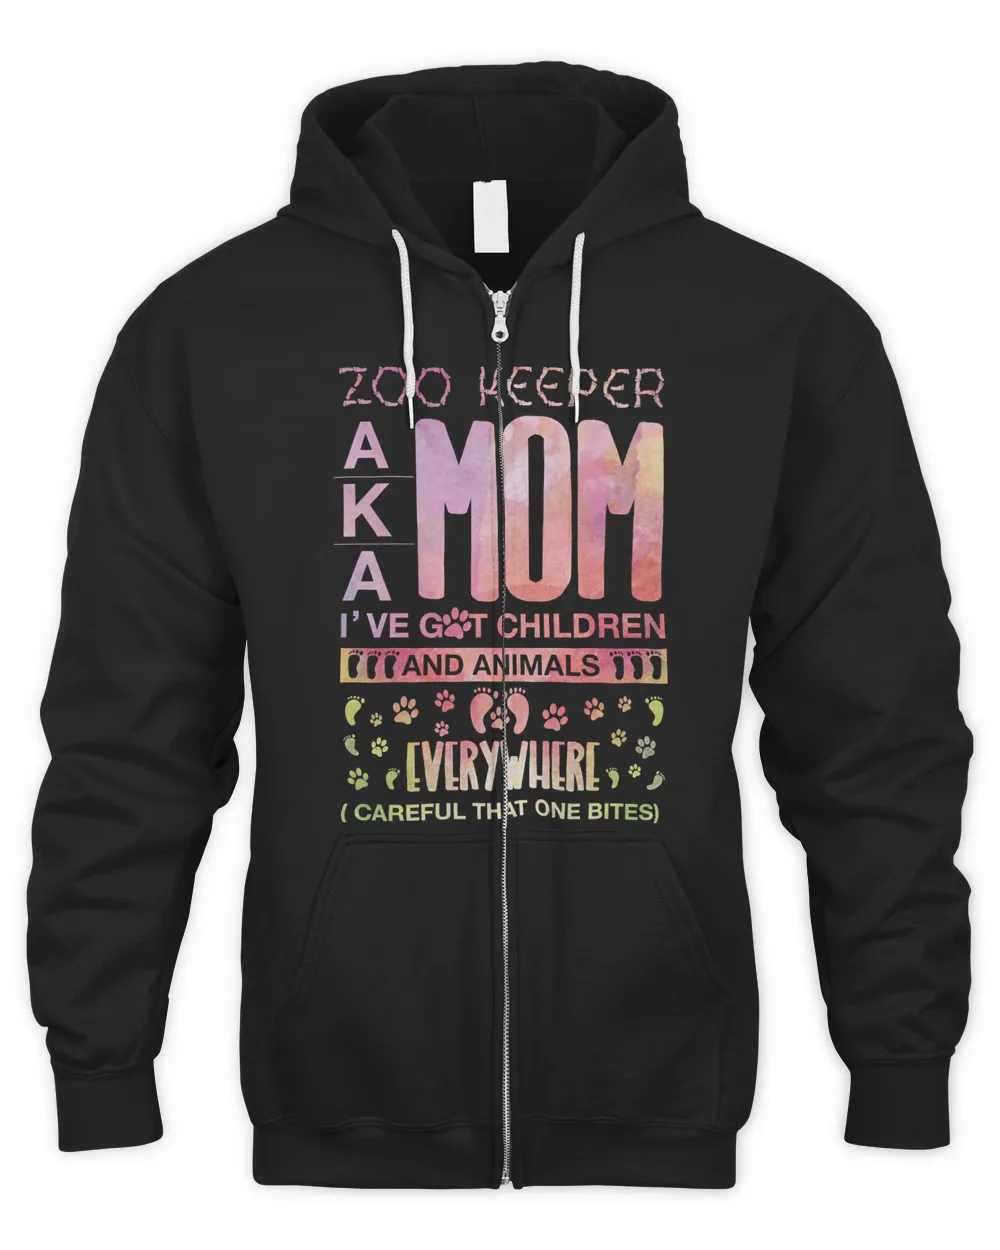 Mother Zoo Keeper A K A Mom Ive Got Children And Animals Everywhere Careful That One Bites Mom